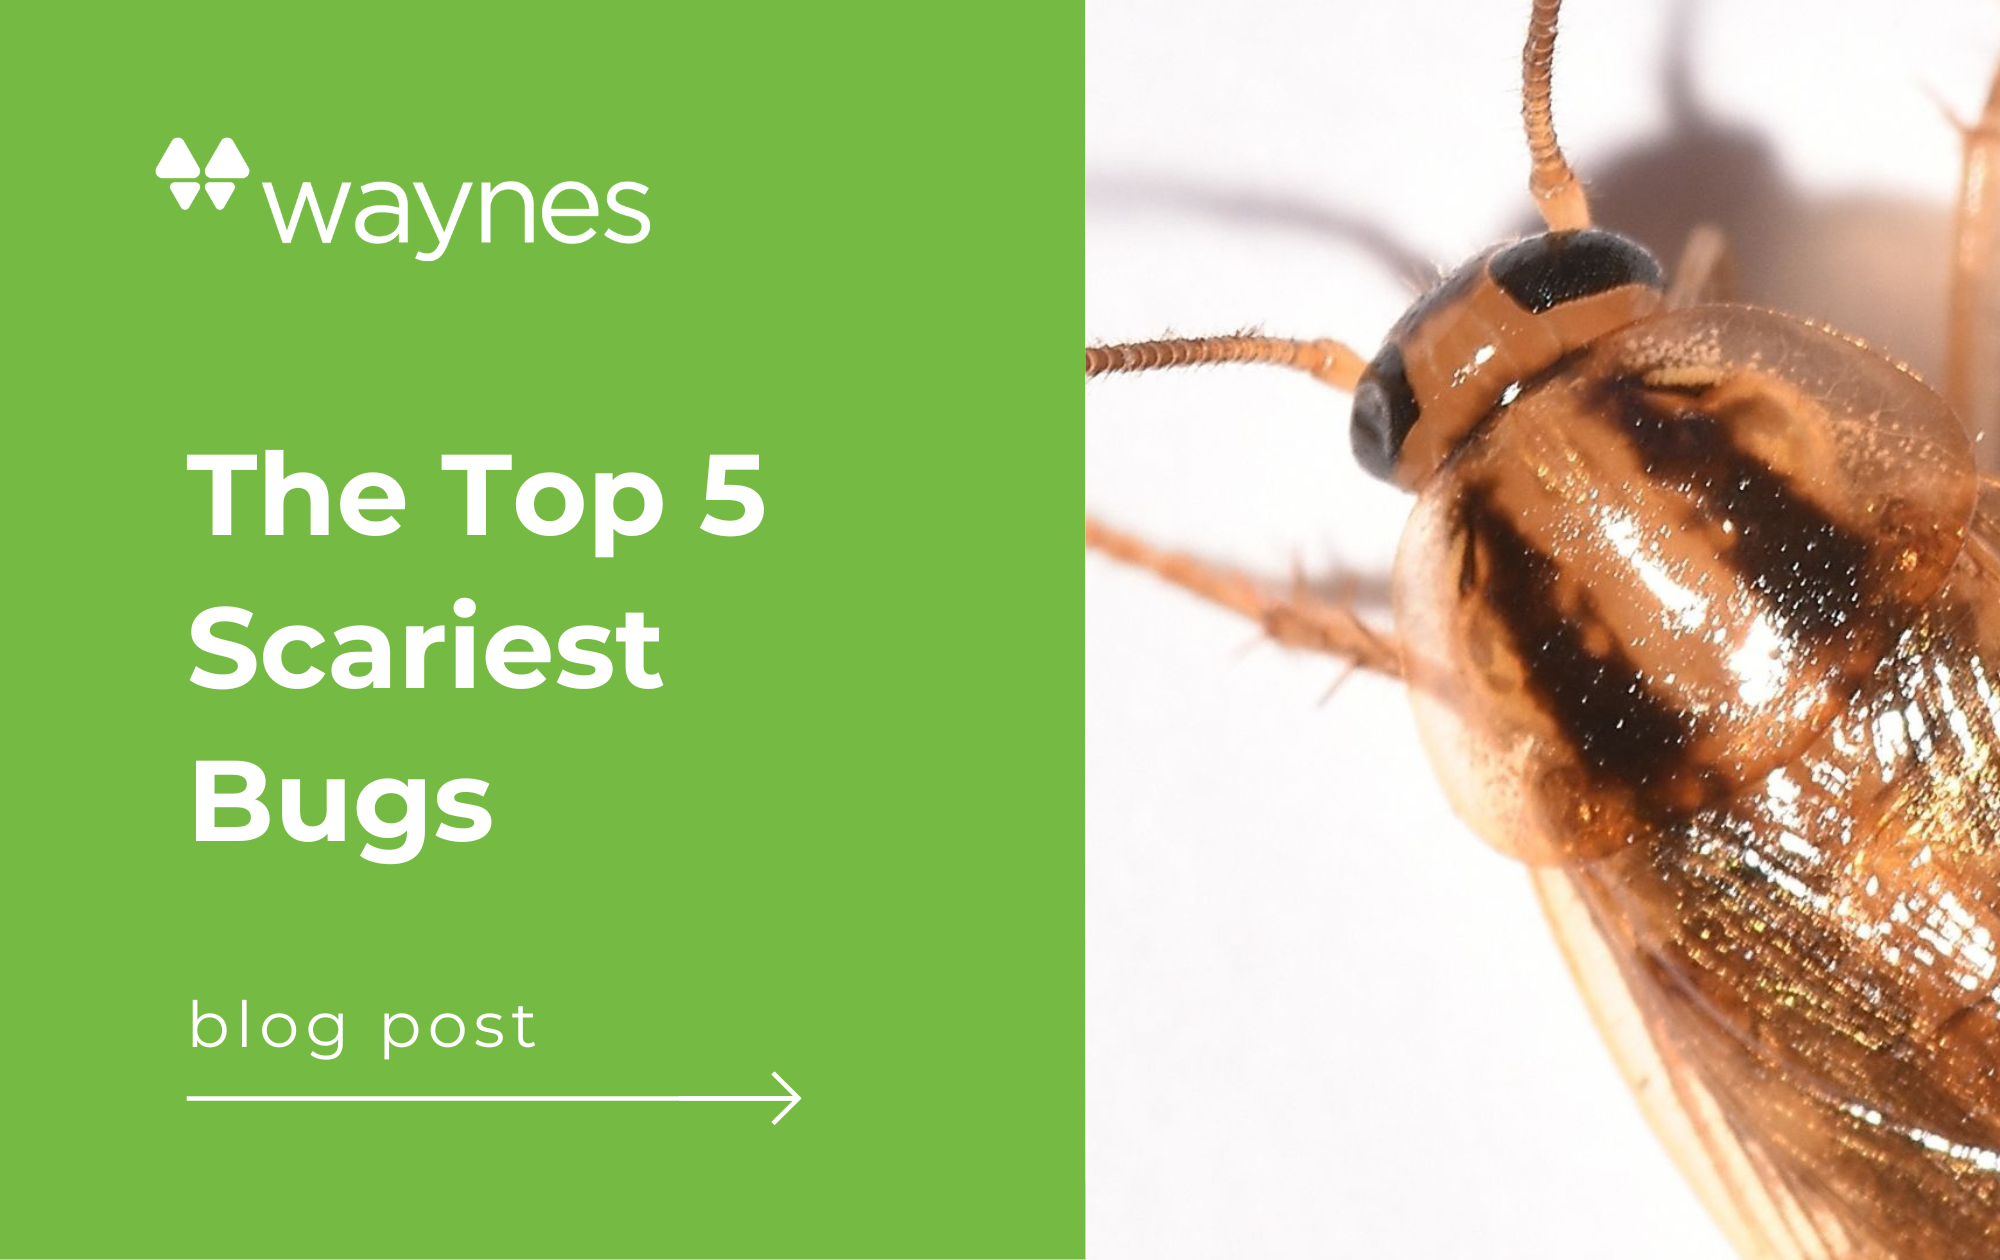 cockroach: the top 5 scariest bugs